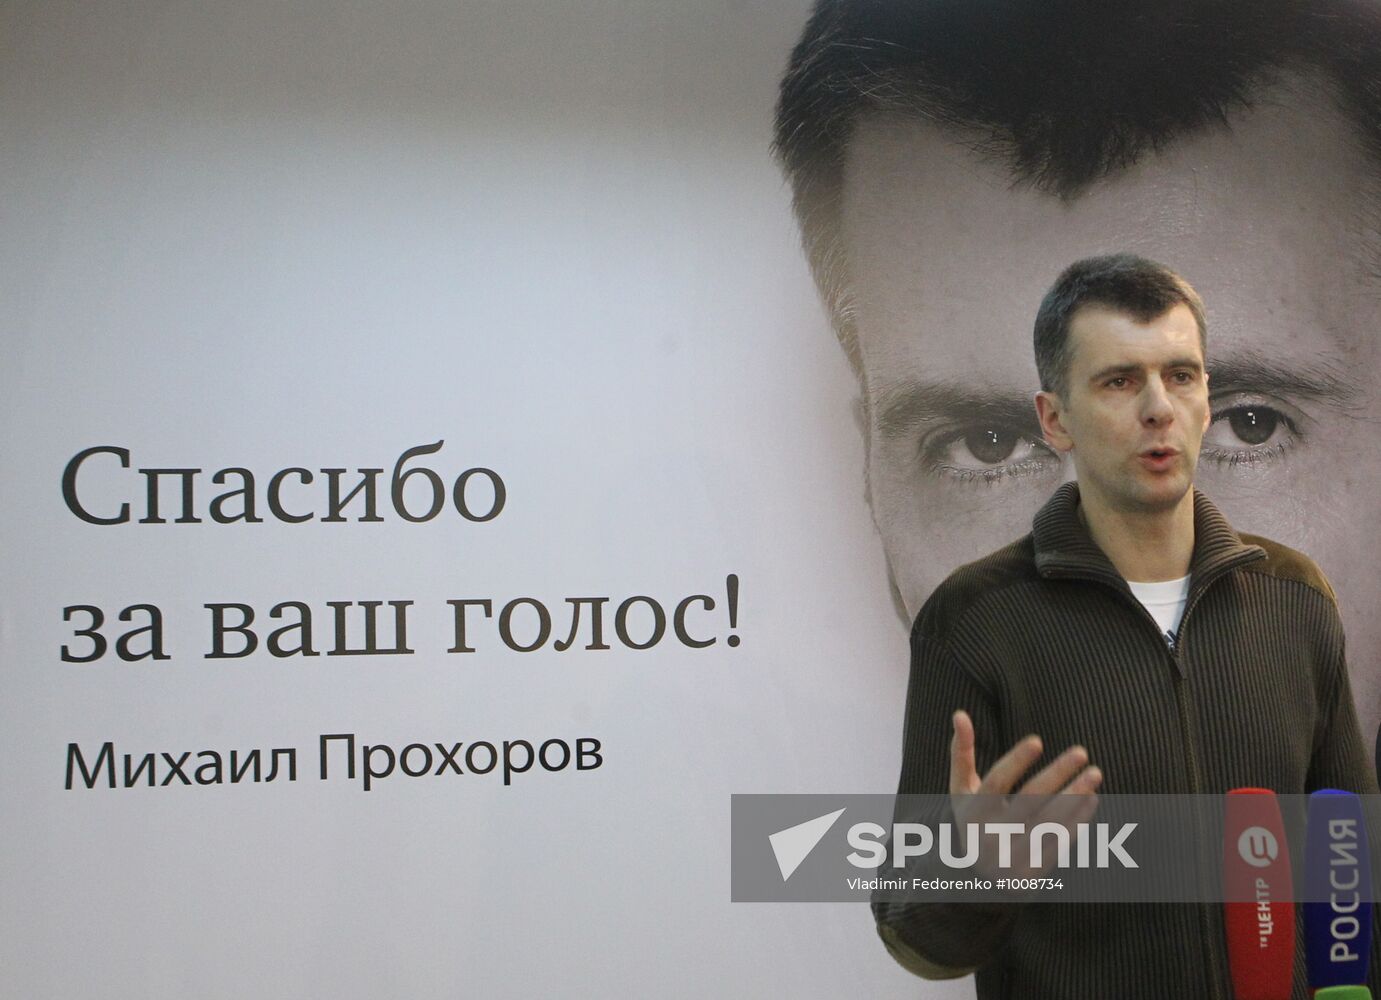 Mikhail Prokhorov opens liaison office in Moscow